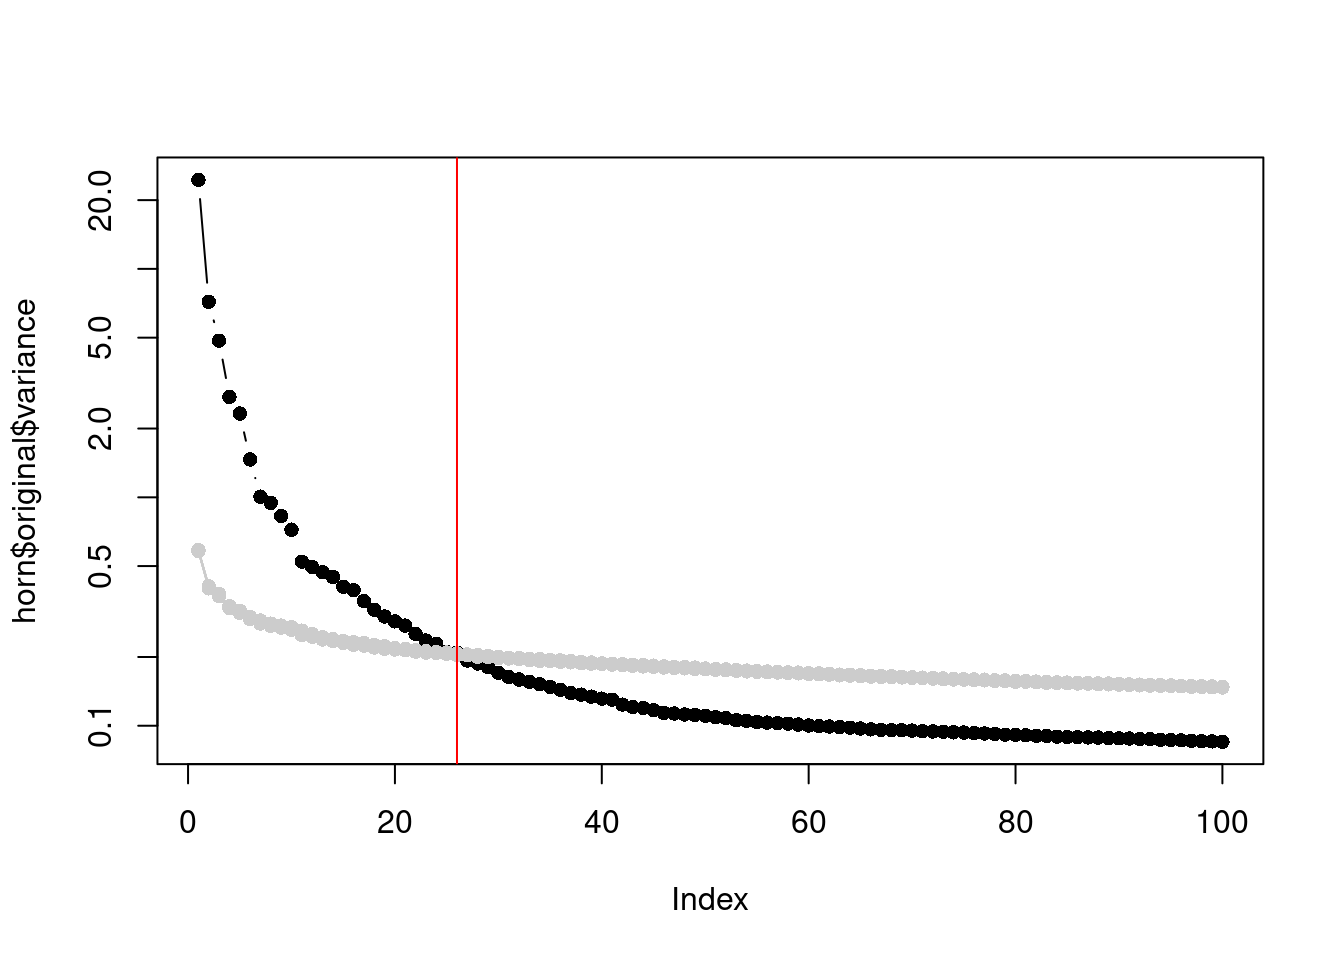 Percentage of variance explained by each PC in the original matrix (black) and the PCs in the randomized matrix (grey) across several randomization iterations. The red line marks the chosen number of PCs.